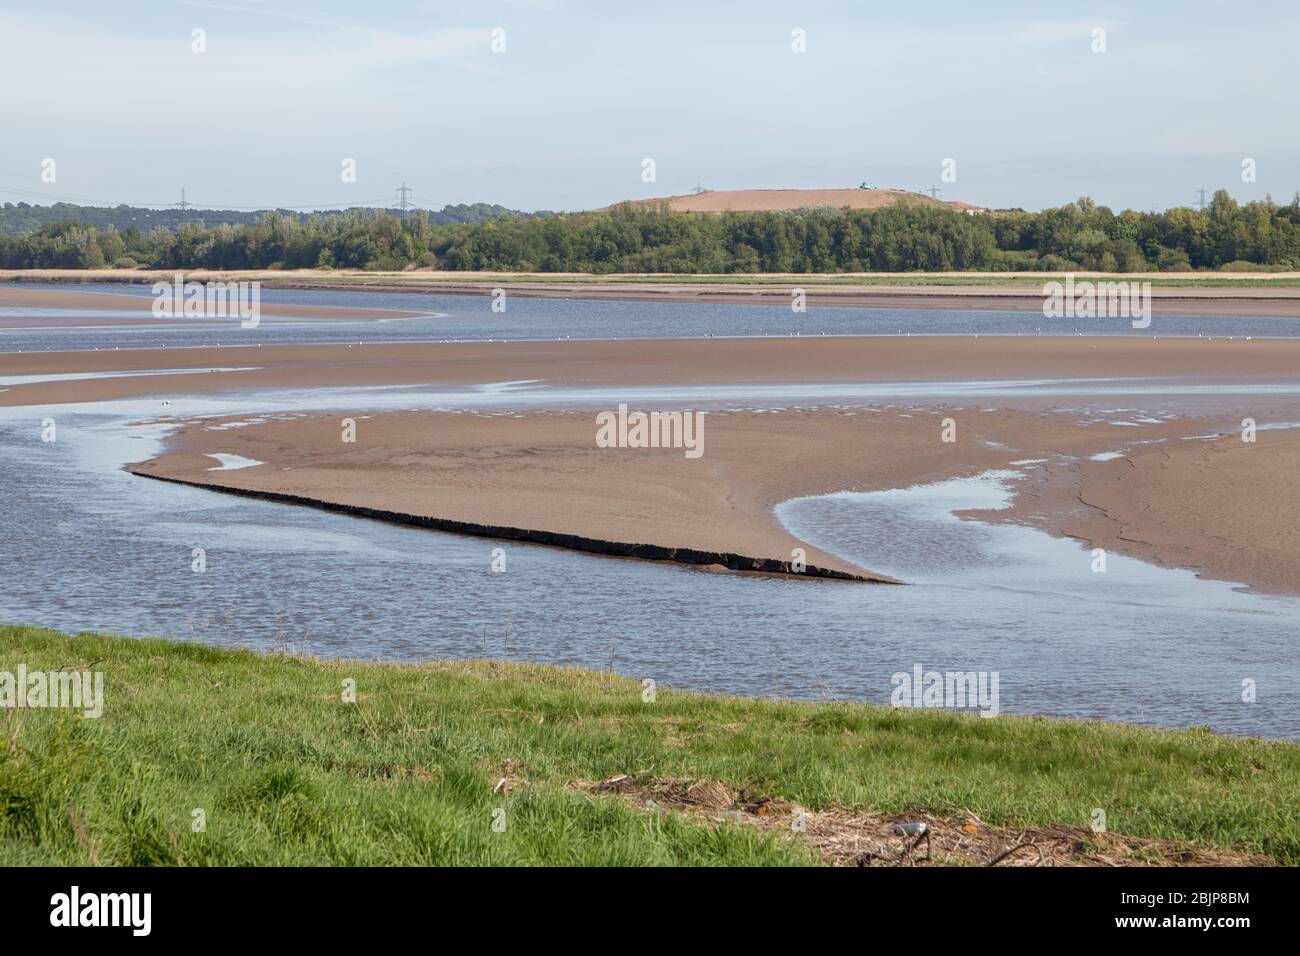 Saltmarsh and sandbanks at low tide on the Mersey Estuary viewed from Widnes Warth; an area of walkways and bird hides near Widnes Stock Photo